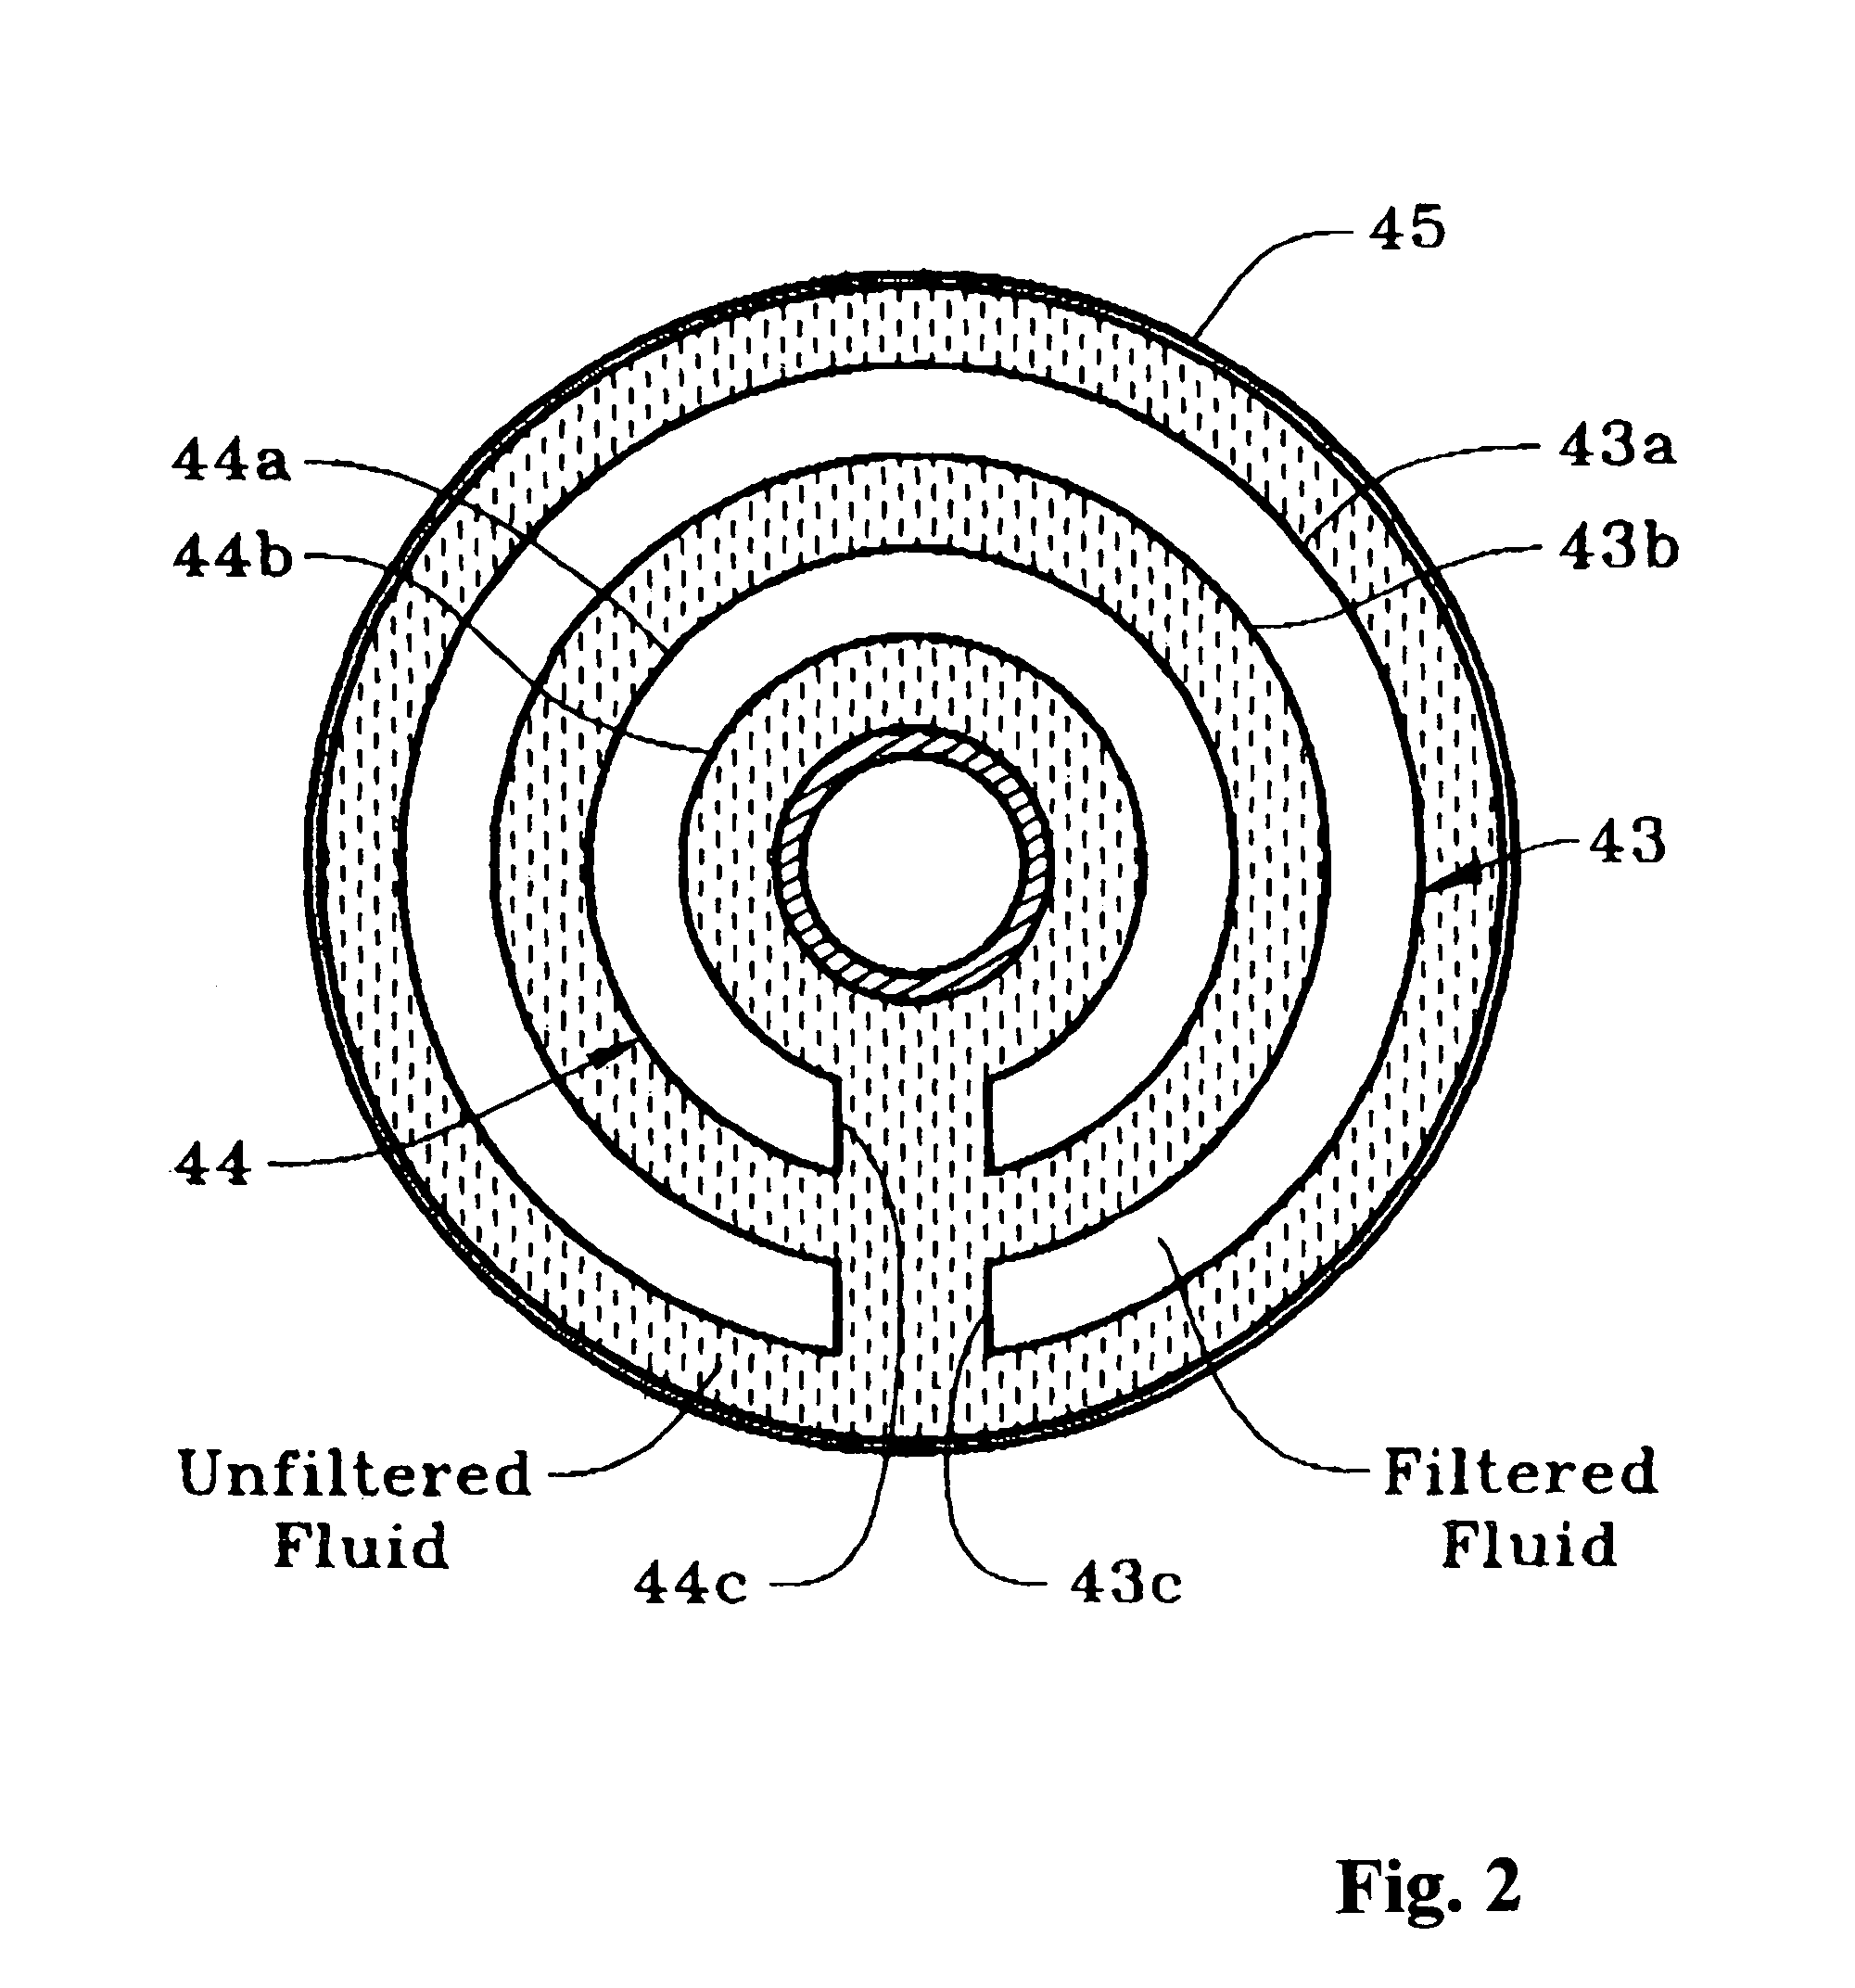 Concentric C-shaped filter and screen topology